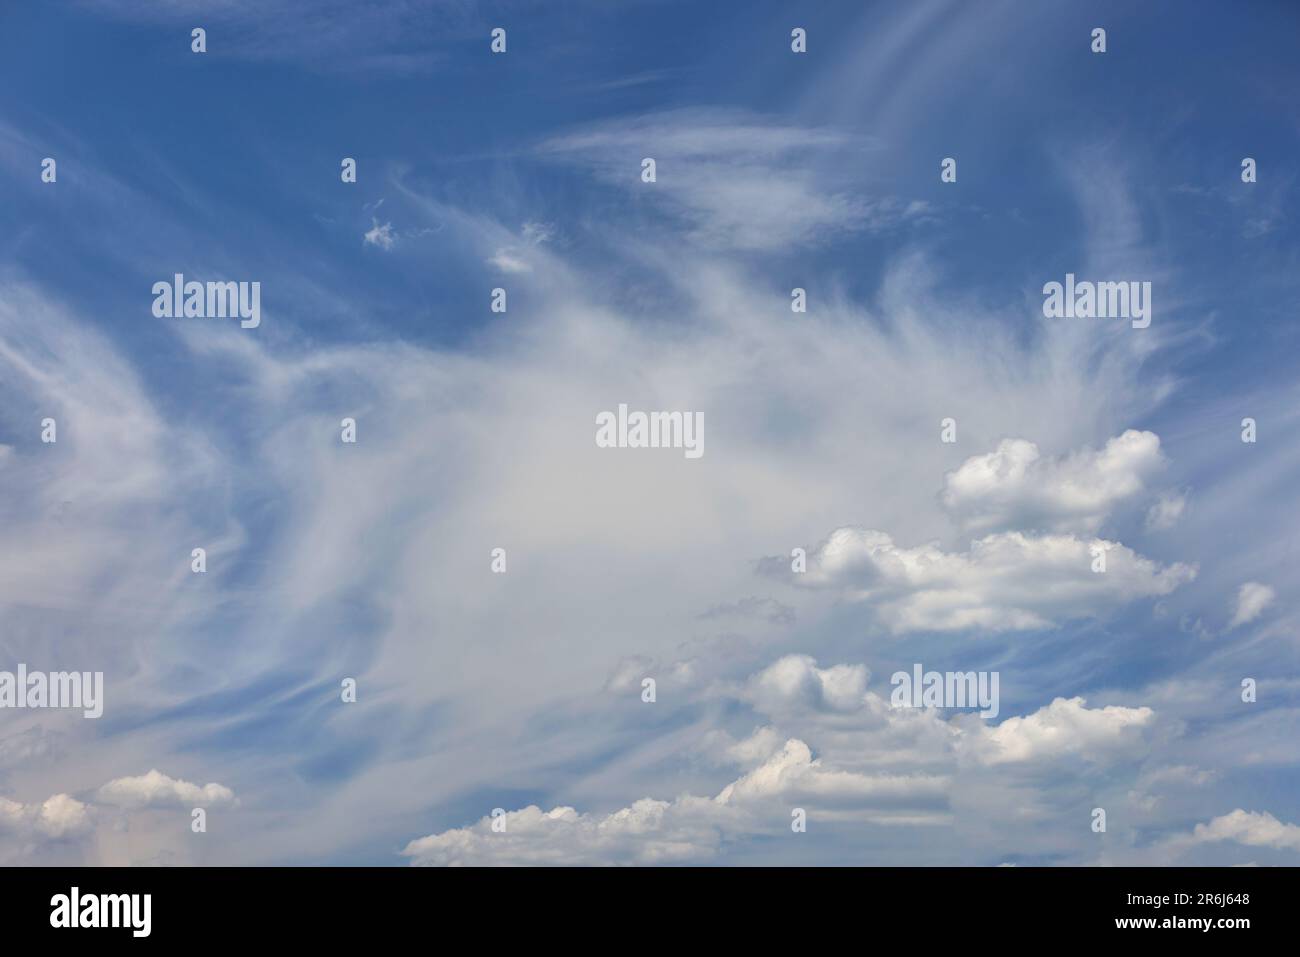 White clouds and ornate haze in the blue sky. Background and texture of the sky above. Stock Photo